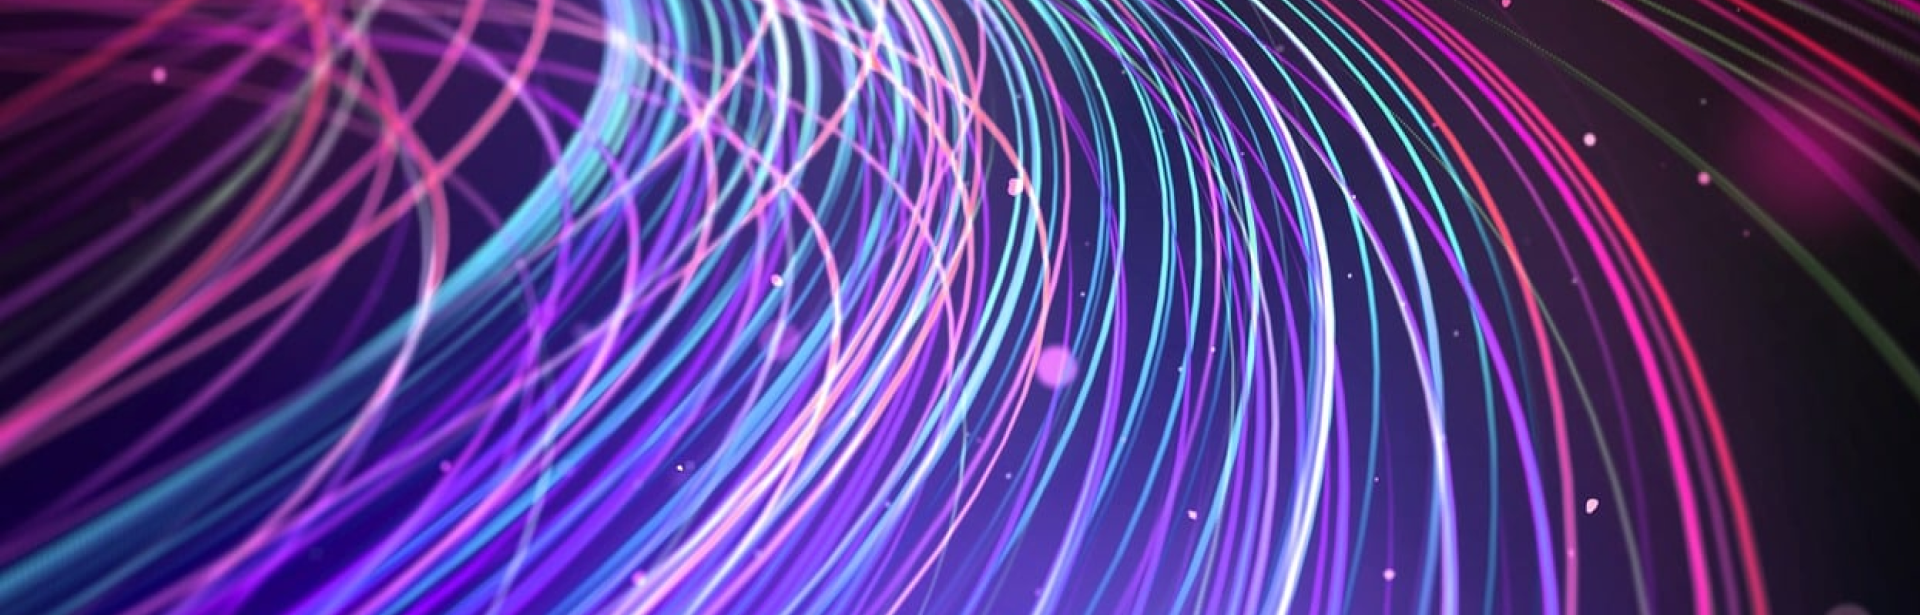 A purple and blue background with lines of light